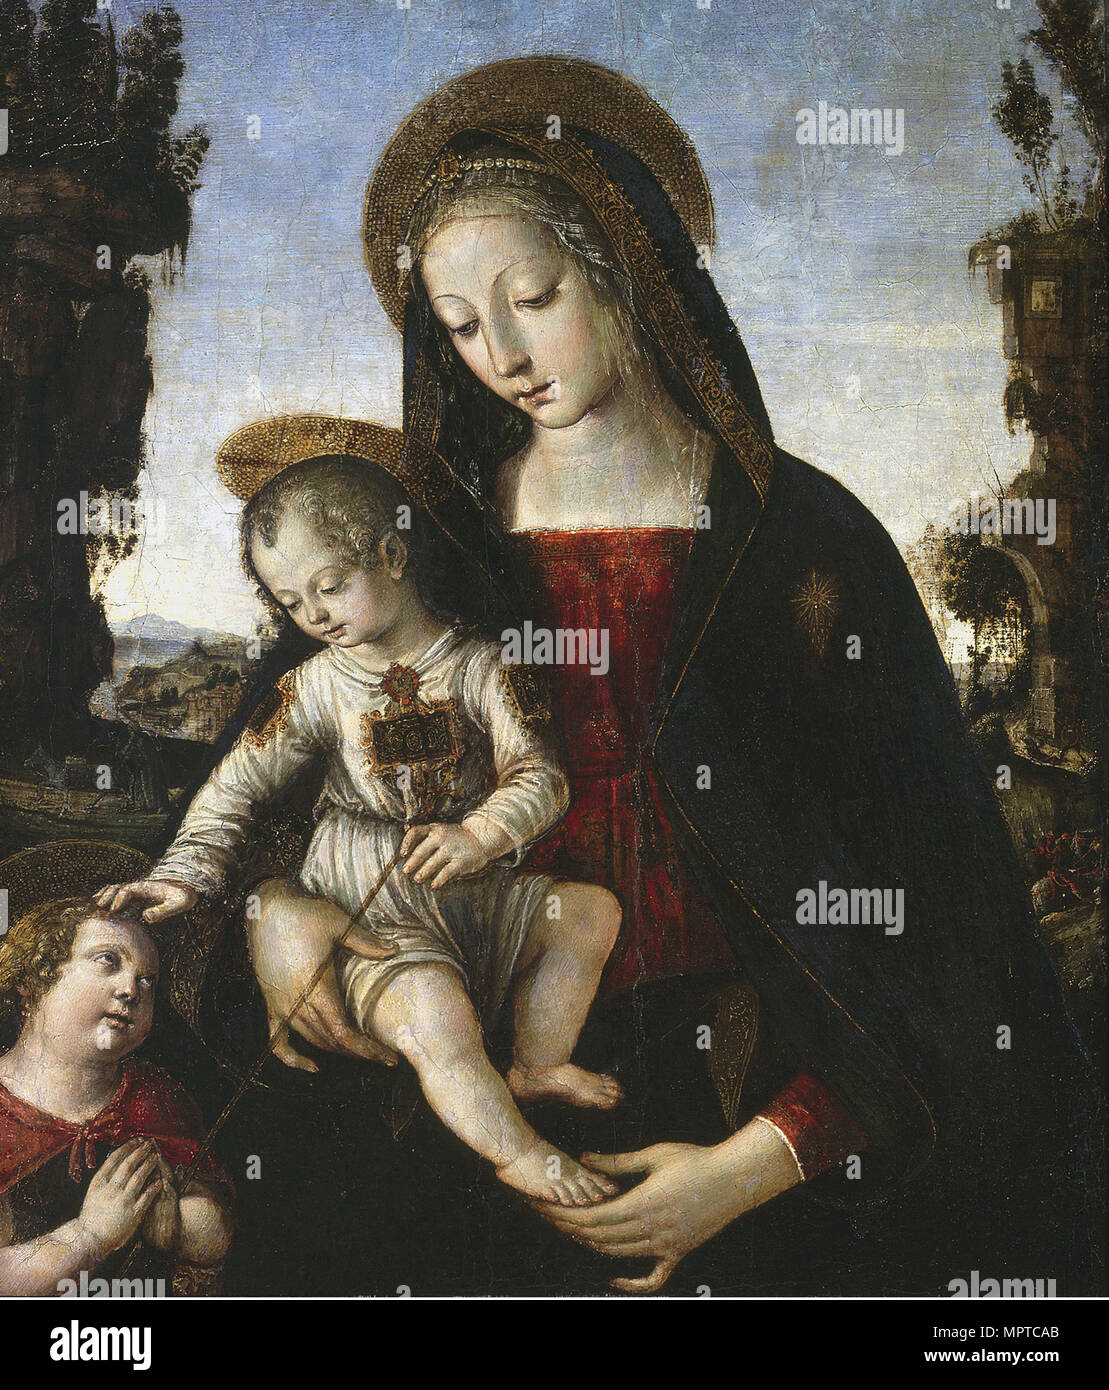 Virgin and child with John the Baptist as a Boy. Stock Photo